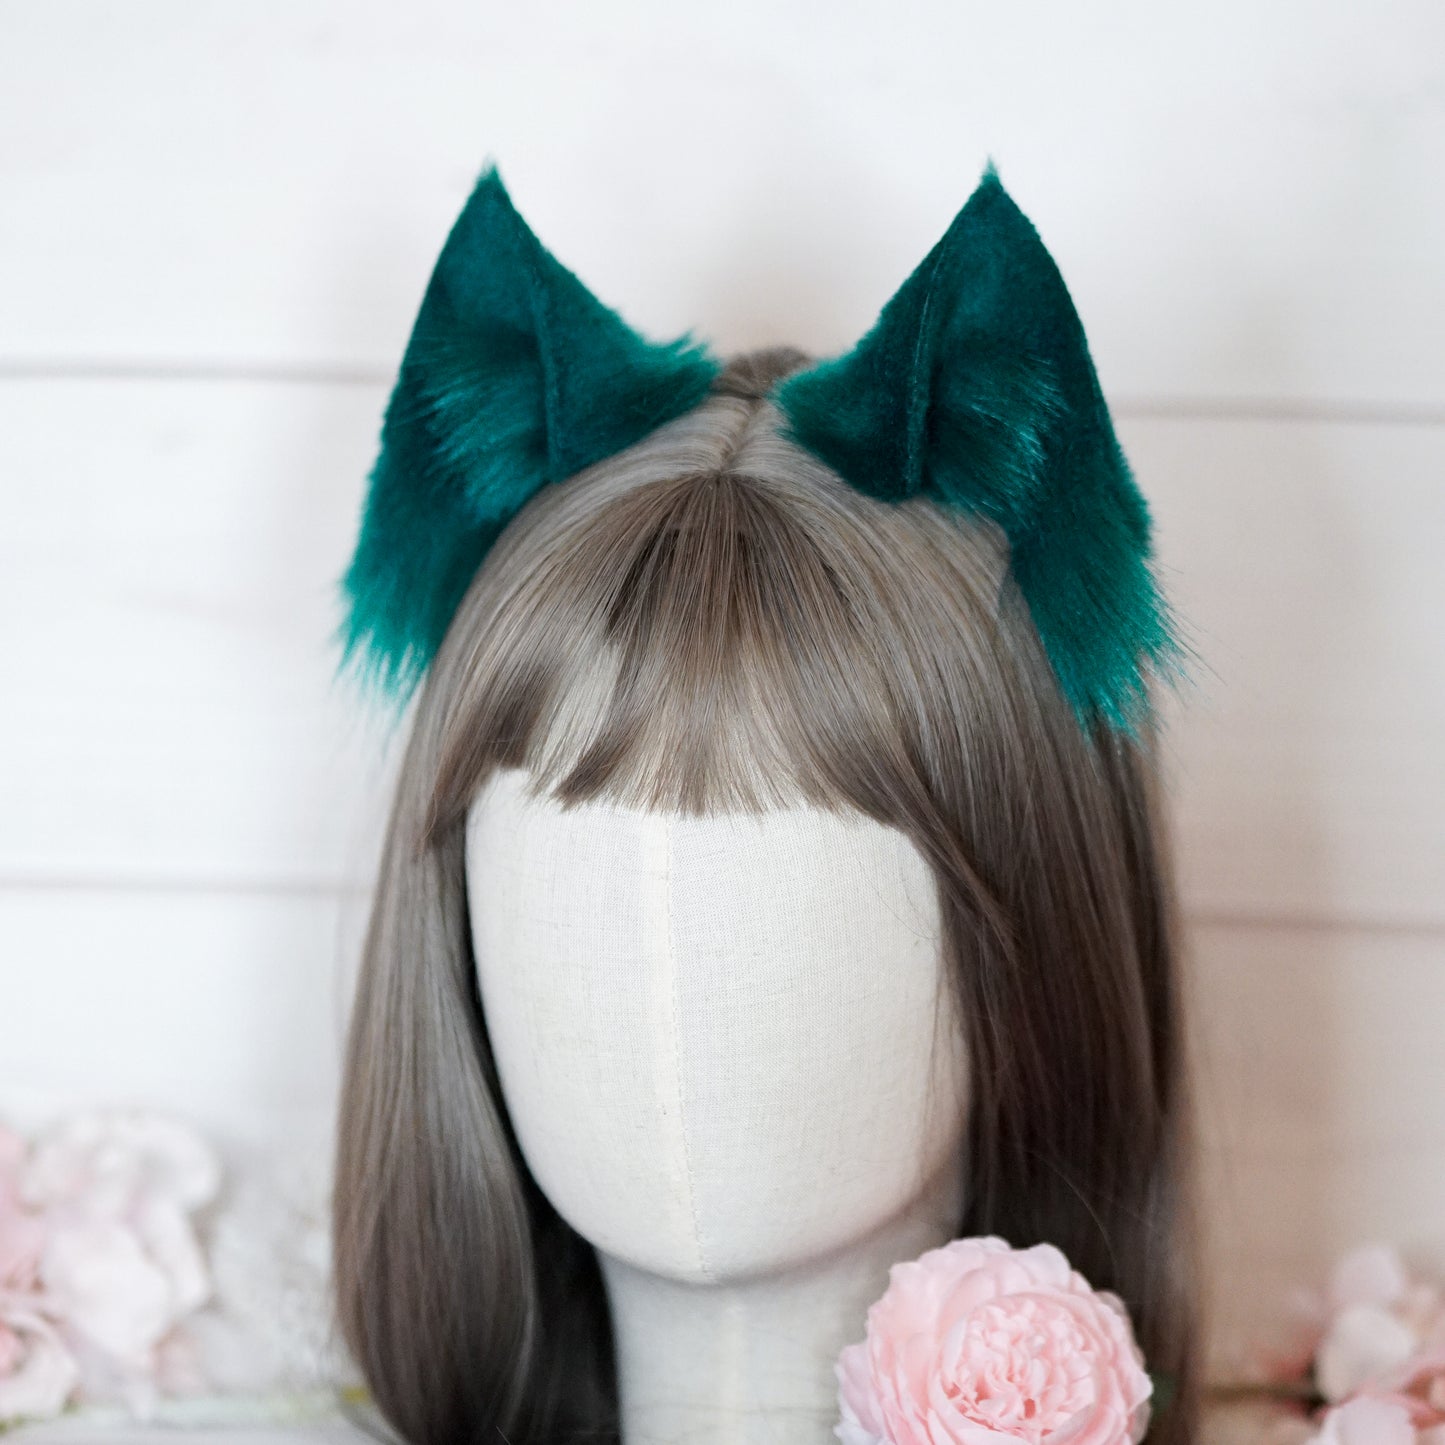 Maomao The Apothecary Diaries Cosplay Ears in Green